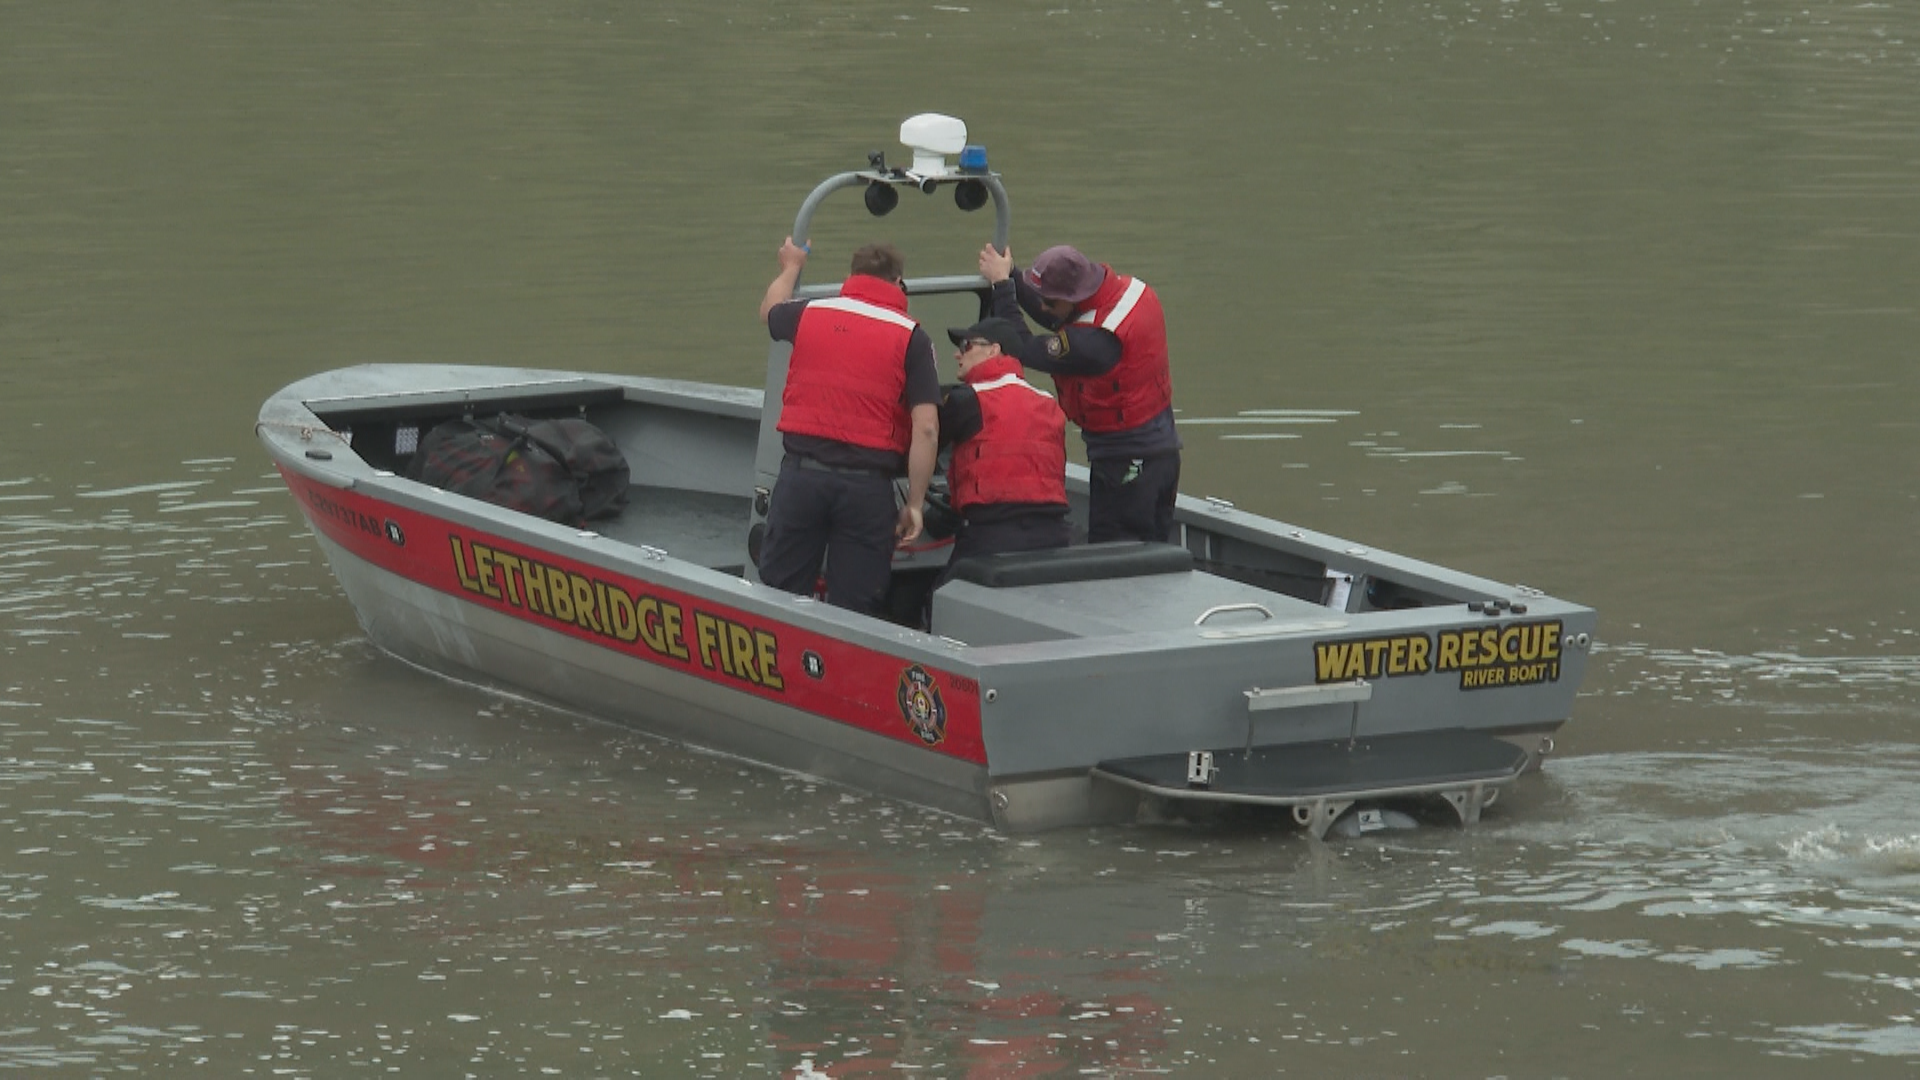 Water rescue boat on the old man river